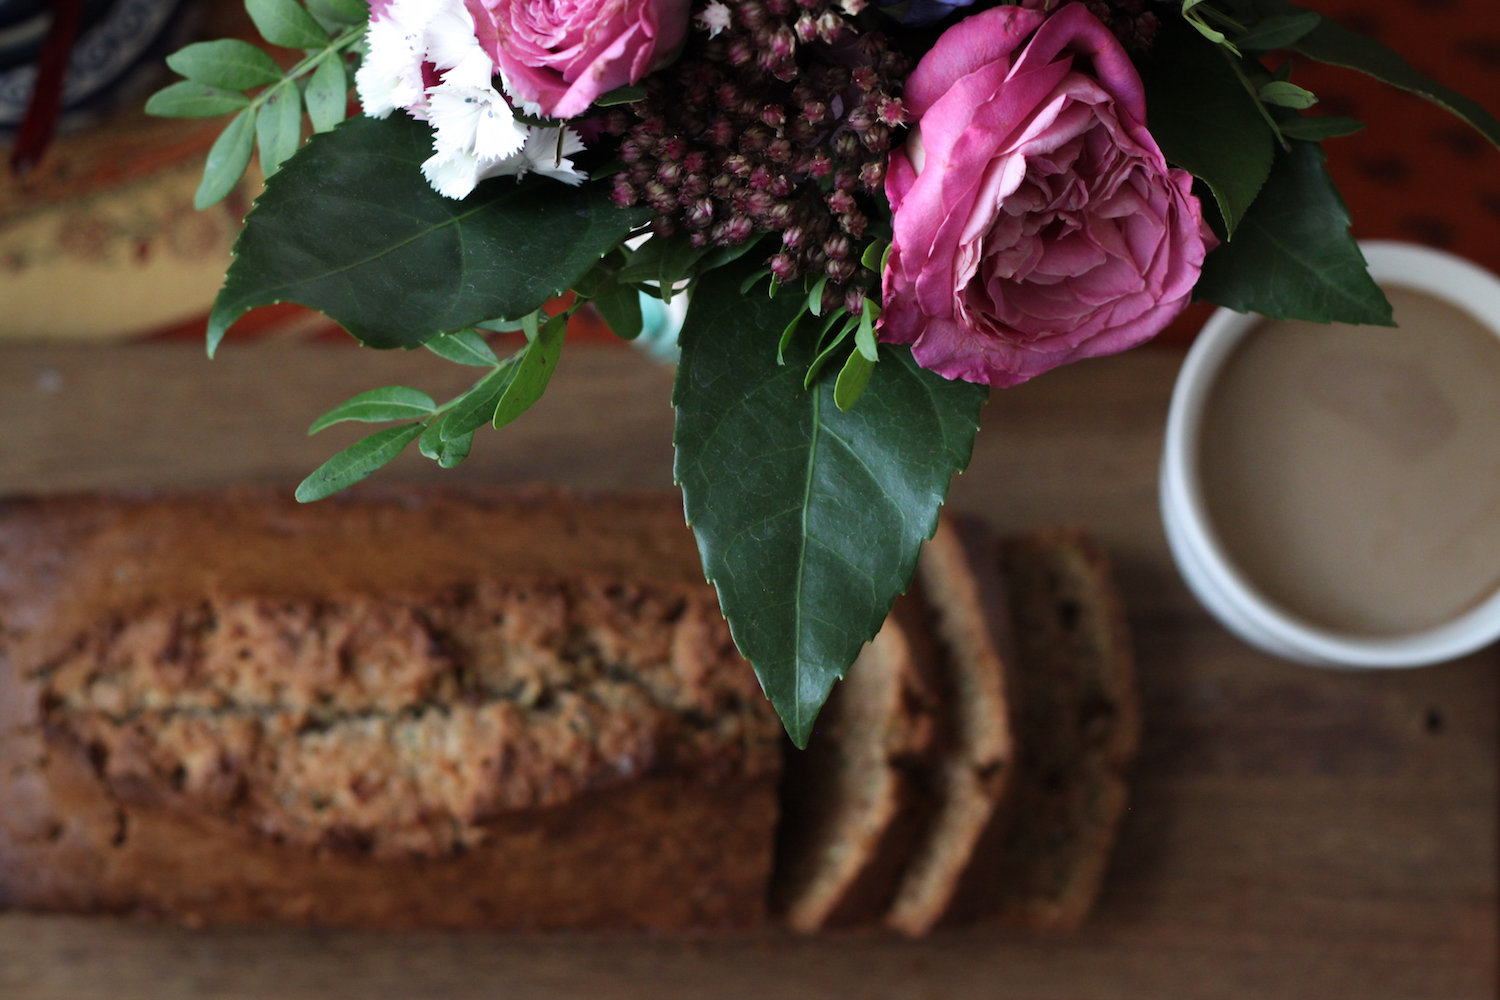 Still life with zucchini bread, flowers, and coffee (Eat Me. Drink Me.)